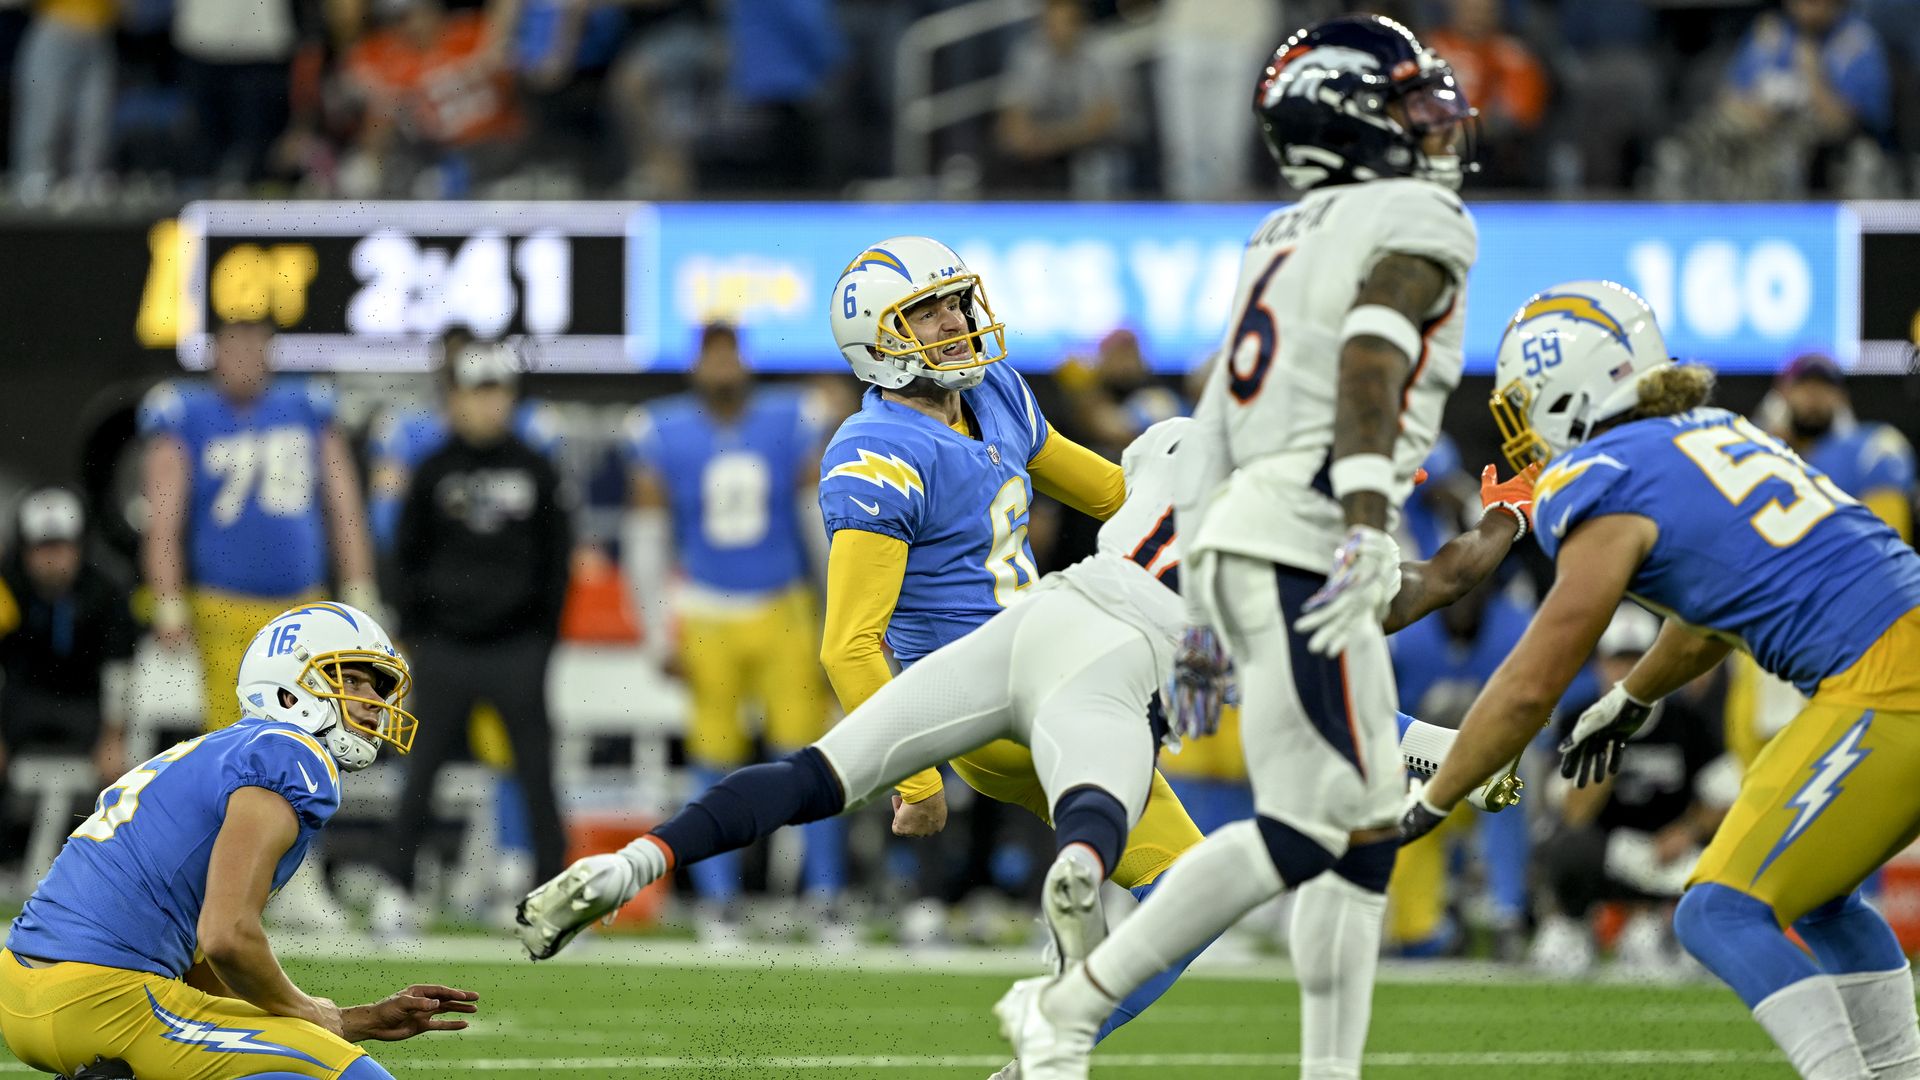  Los Angeles Chargers player kicks a game-winning field goal against the Denver Broncos.